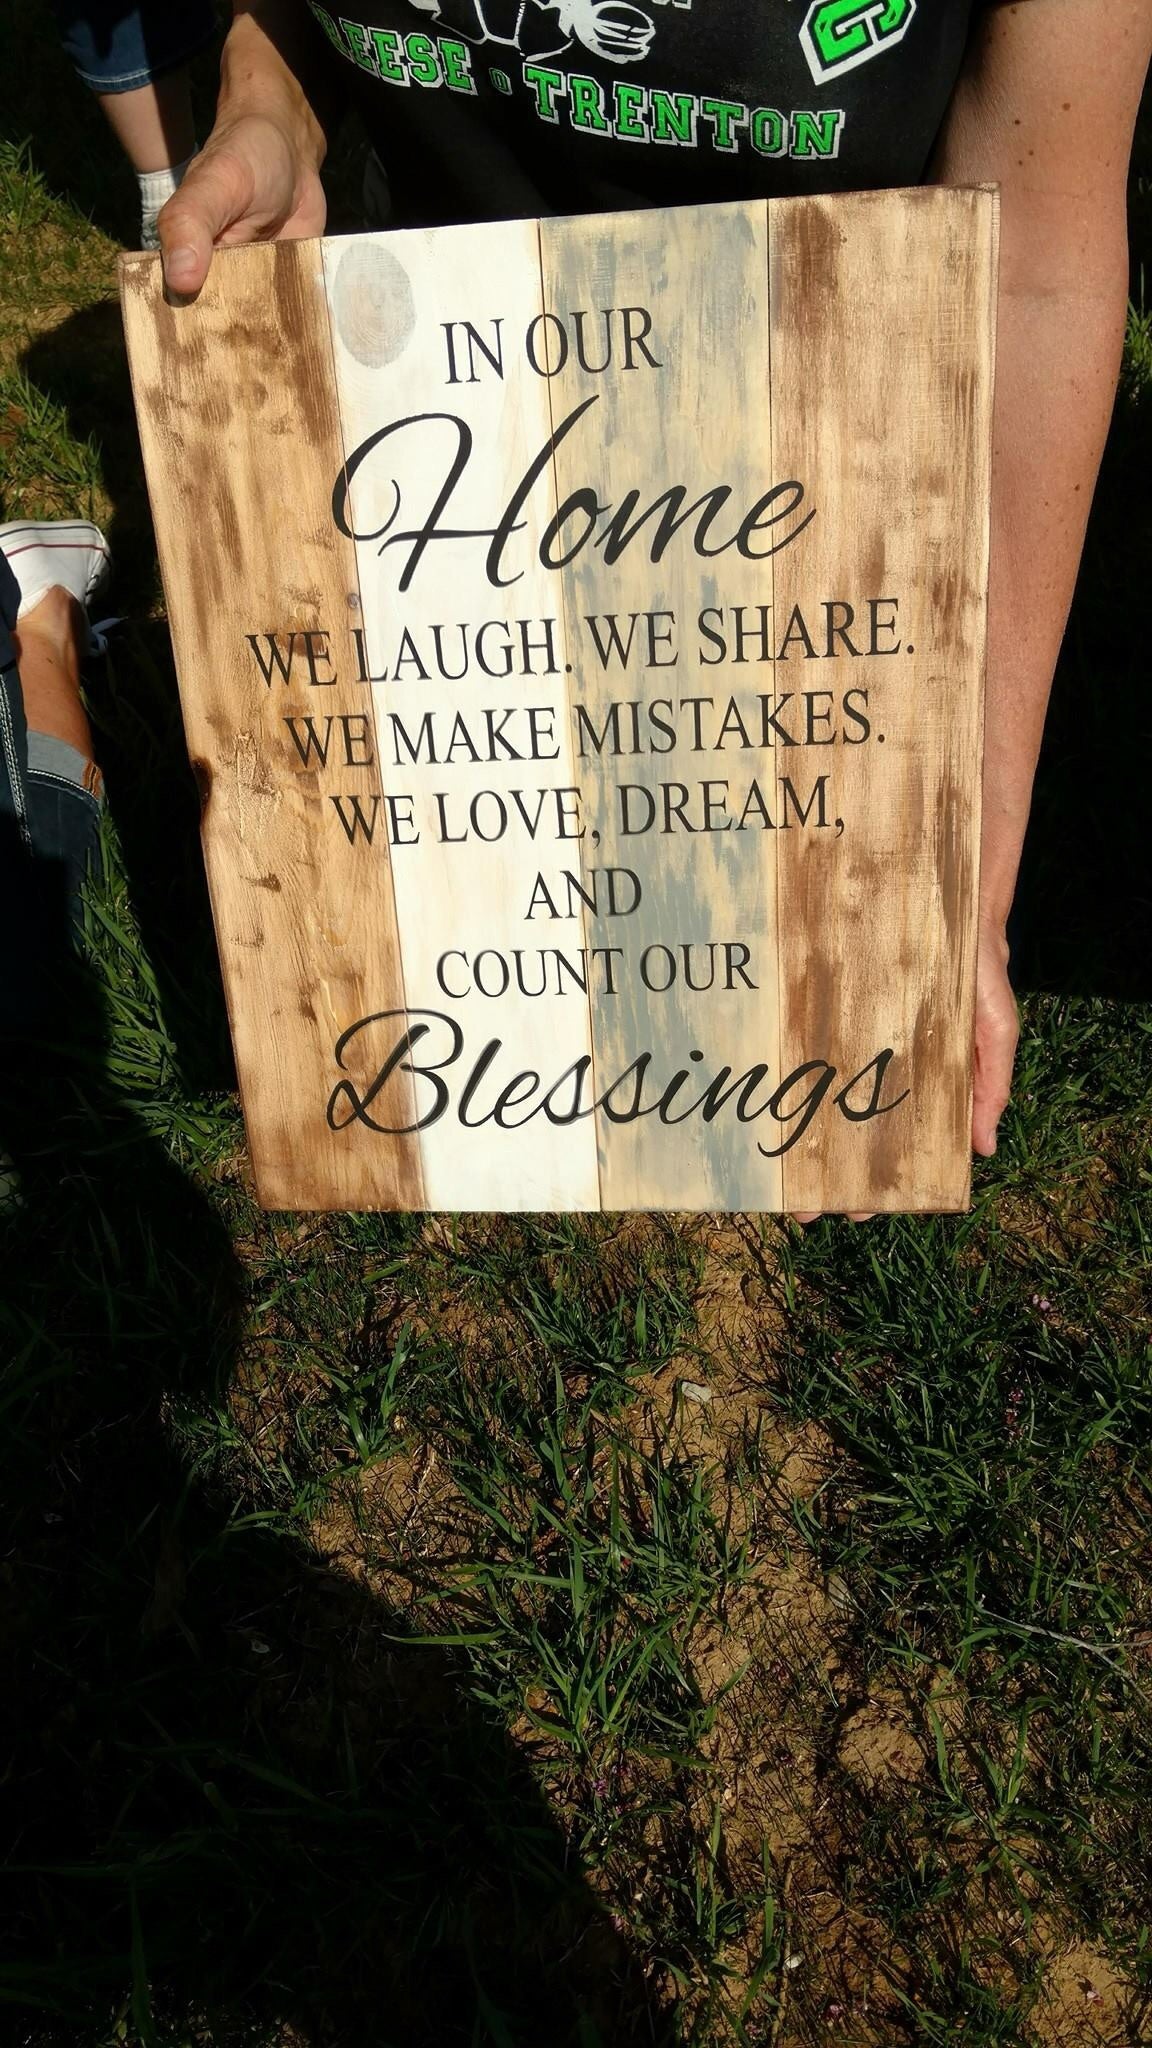 In our home we laugh we share mistakes we love, dream and count our blessings